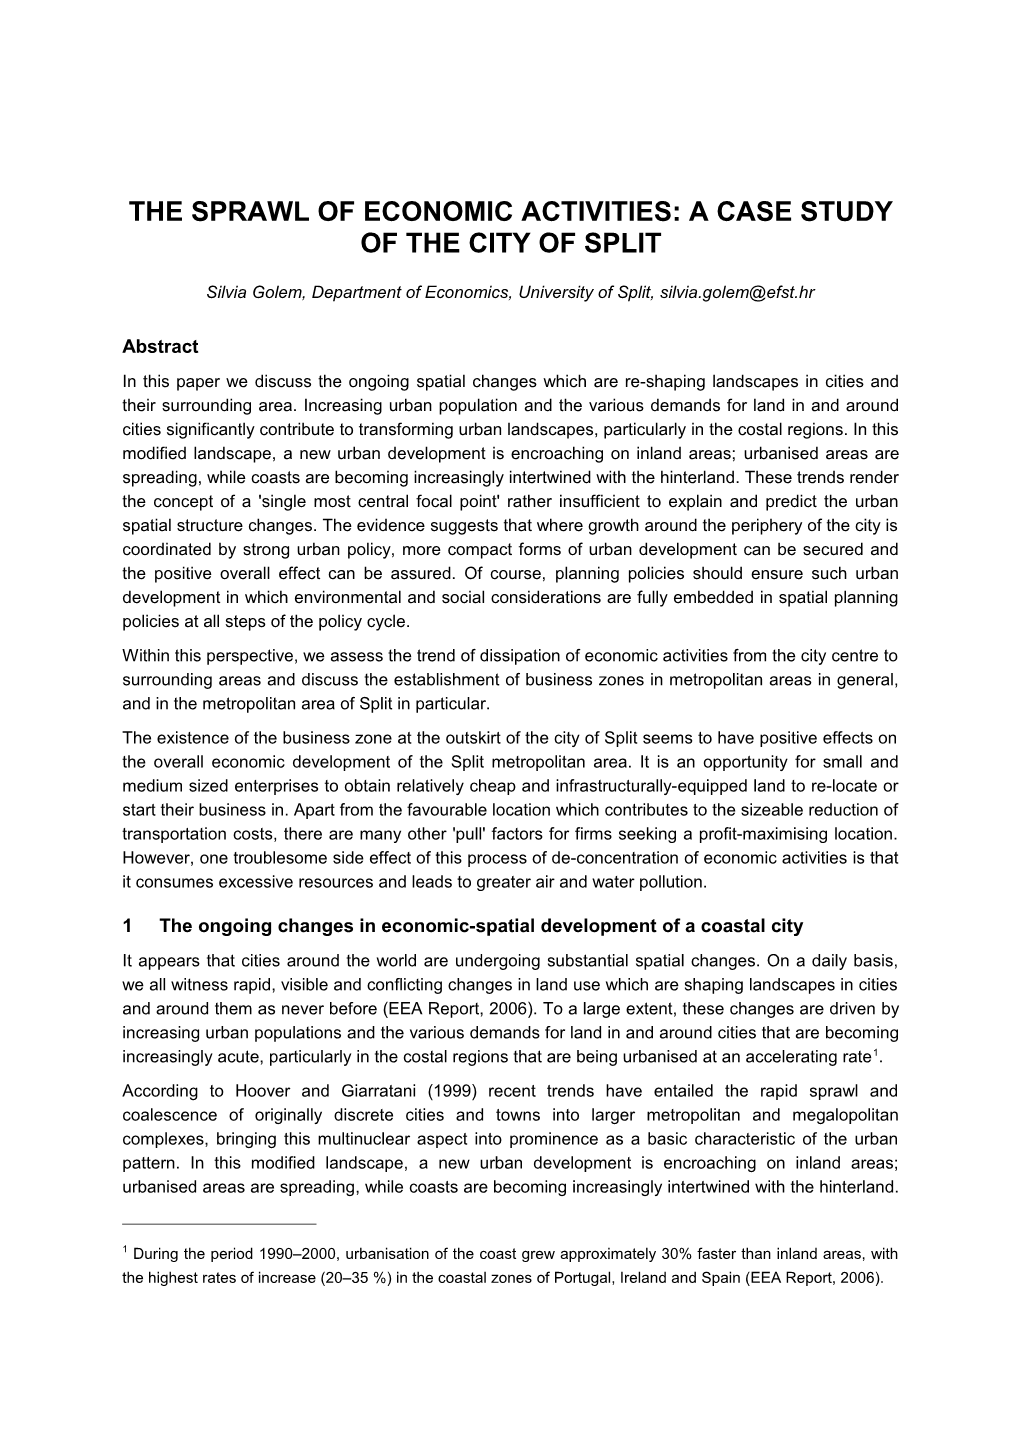 The Sprawl of Economic Activities: a Case Study of the City of Split